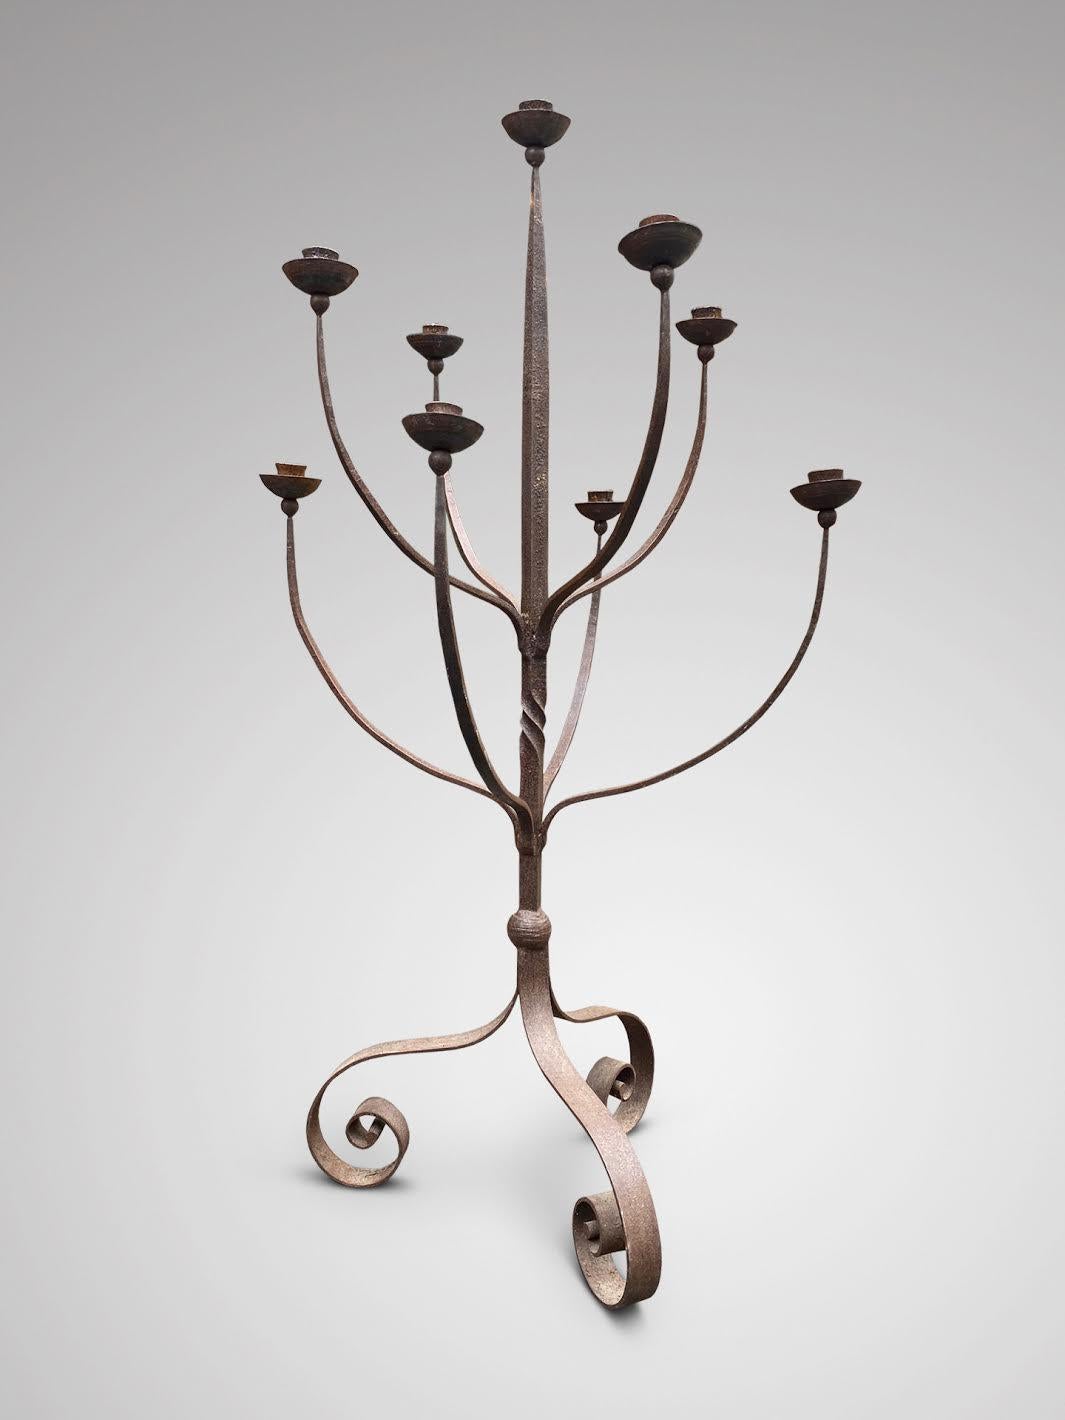 A large 20th century wrought iron 9 branch floor standing candelabra, on three scroll supports. Very decorative item.

The dimensions are:
Height: 163cm (64.2in)
Diameter: 92cm (36.2in)

This wrought iron candelabra is in good antique condition